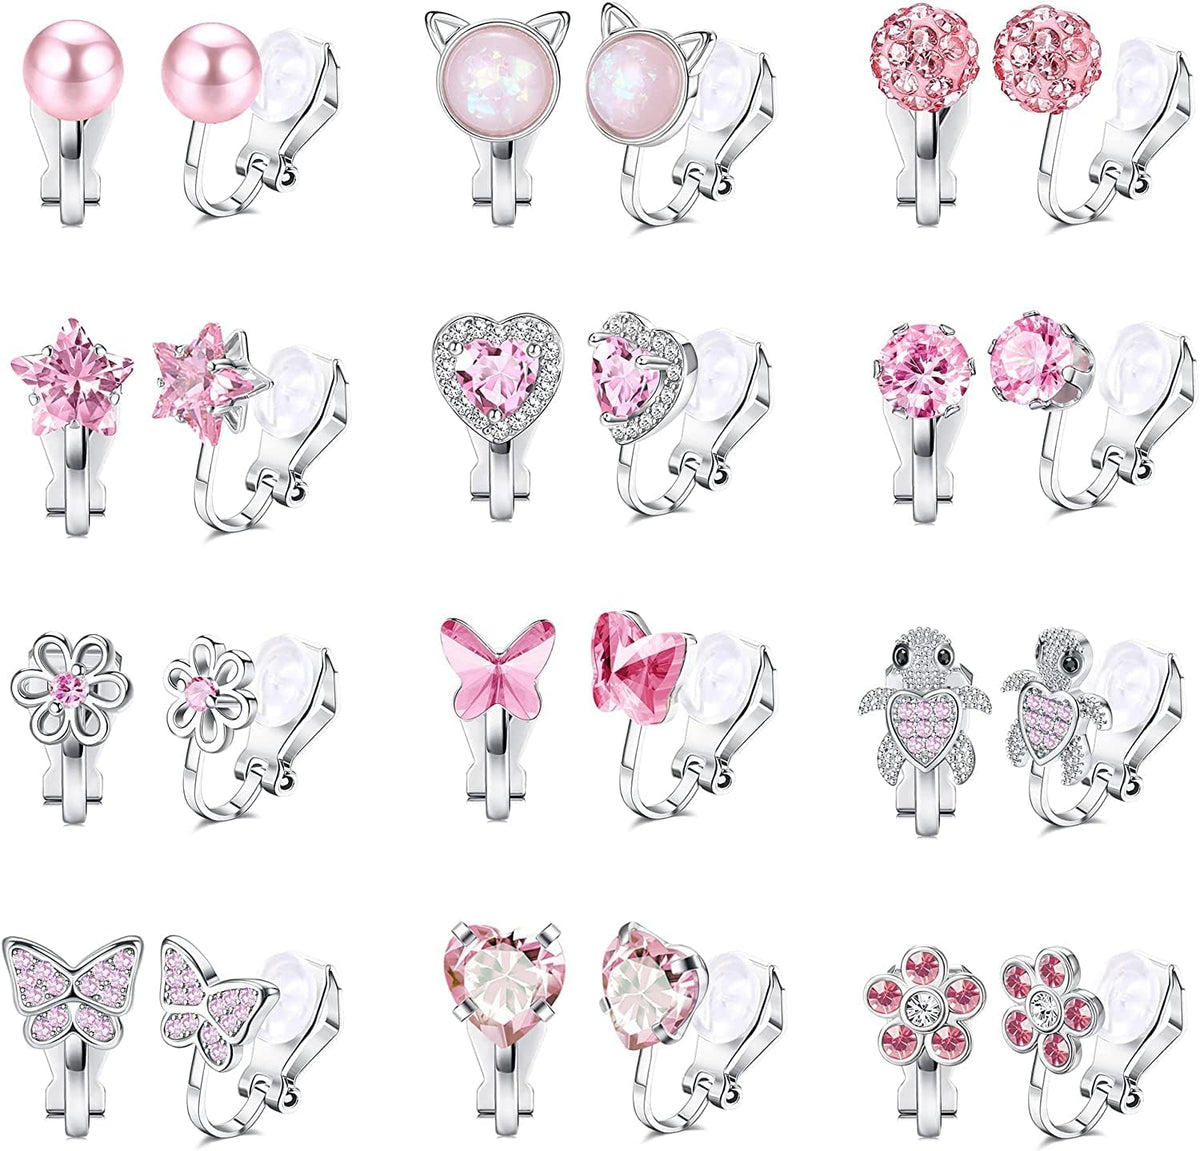 12Pairs Clip on Earrings for Girls Women Butterfly Flower Heart Rainbow Cat Multicolored Non-Pierced Earrings Cute Clip-on Earrings Set